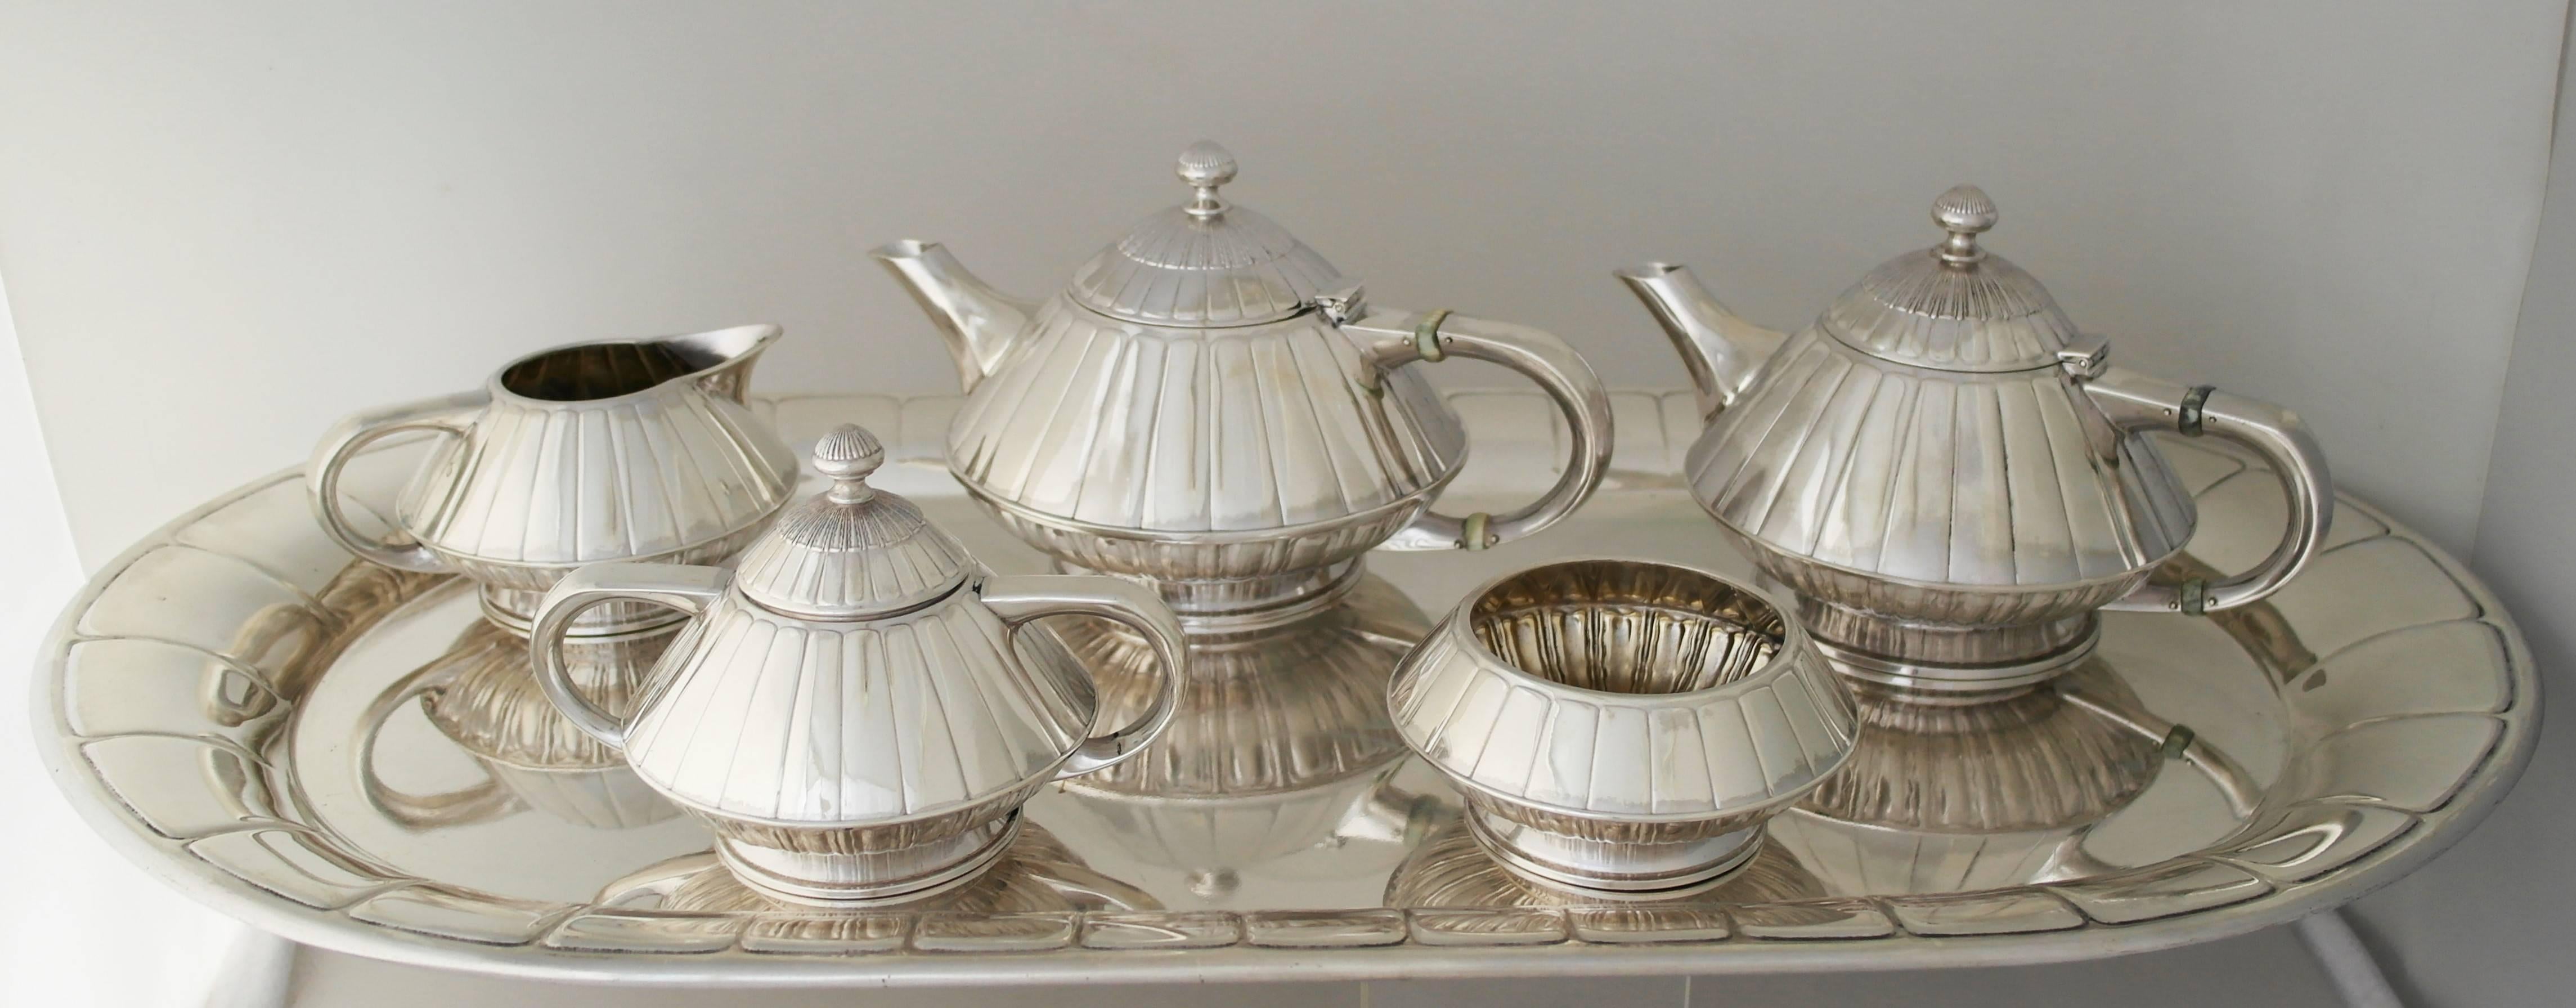 American SUPERB Museum Quality ART DECO Sterling Silver Tea and Coffee Set, circa 1928 For Sale